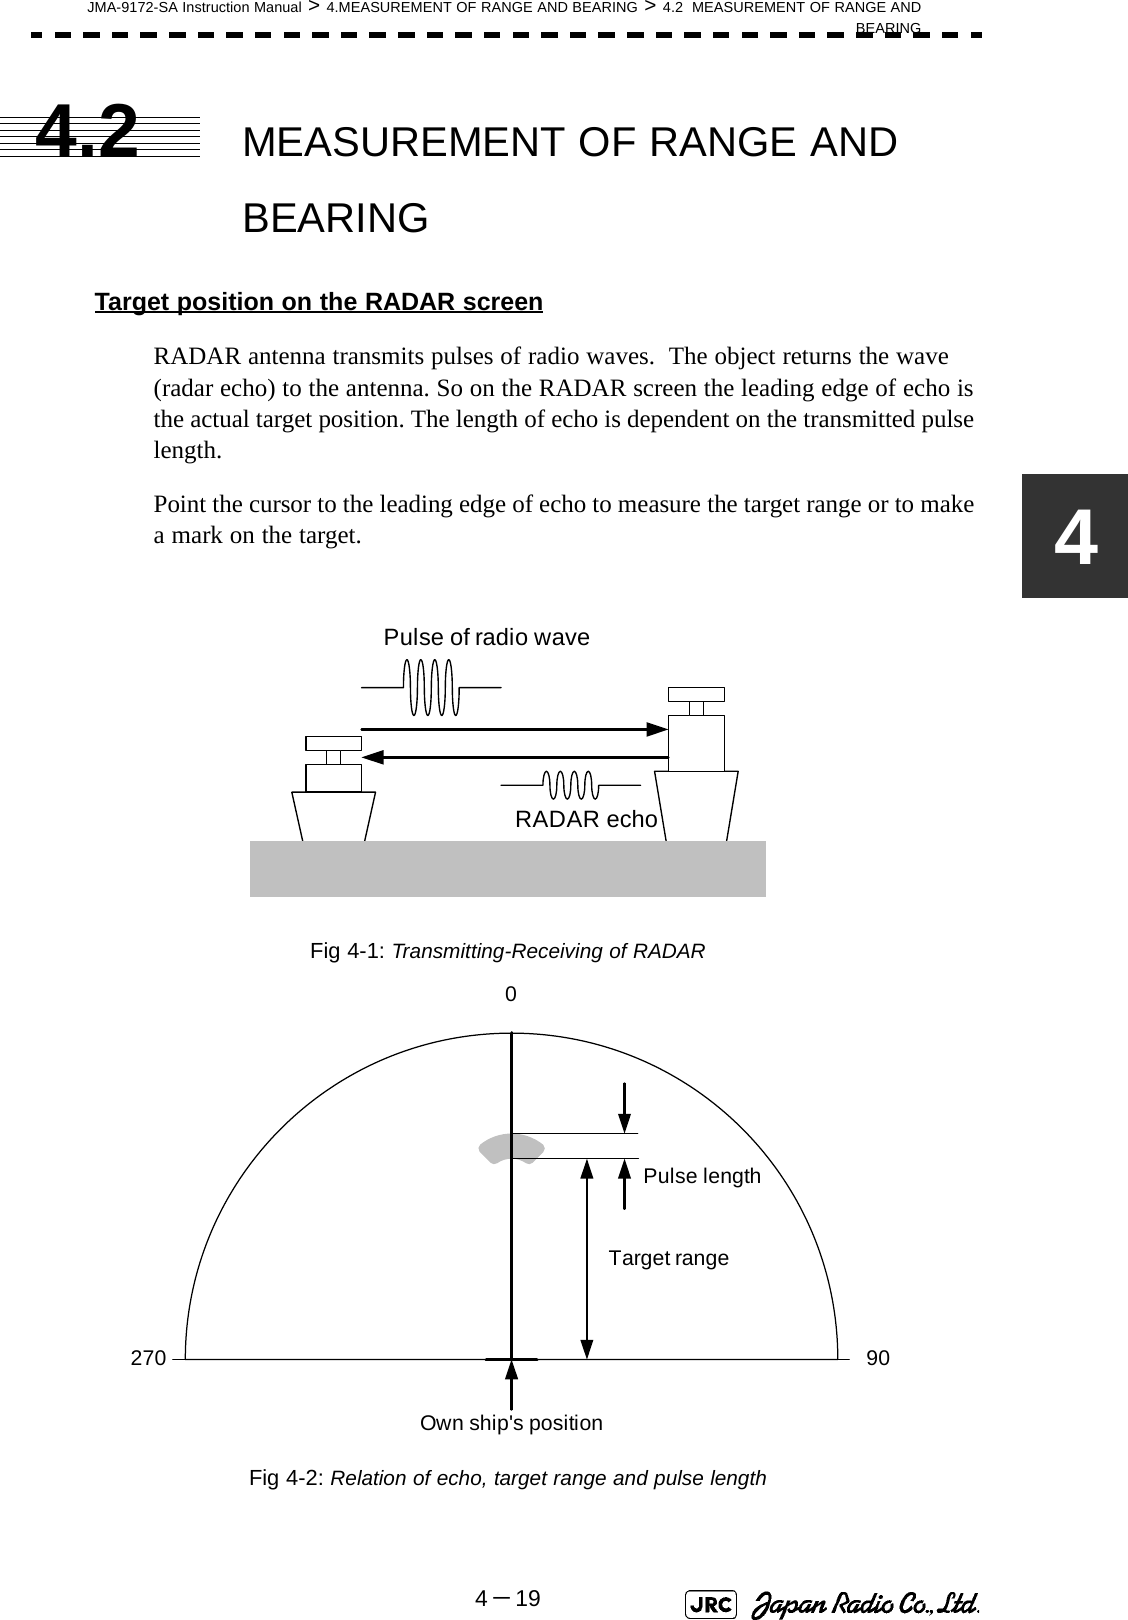 JMA-9172-SA Instruction Manual &gt; 4.MEASUREMENT OF RANGE AND BEARING &gt; 4.2  MEASUREMENT OF RANGE ANDBEARING4－1944.2 MEASUREMENT OF RANGE AND BEARINGTarget position on the RADAR screenRADAR antenna transmits pulses of radio waves.  The object returns the wave (radar echo) to the antenna. So on the RADAR screen the leading edge of echo is the actual target position. The length of echo is dependent on the transmitted pulse length.Point the cursor to the leading edge of echo to measure the target range or to make a mark on the target.Fig 4-1: Transmitting-Receiving of RADARFig 4-2: Relation of echo, target range and pulse lengthPulse of radio waveRADAR echo0 90270Target rangePulse lengthOwn ship&apos;s position